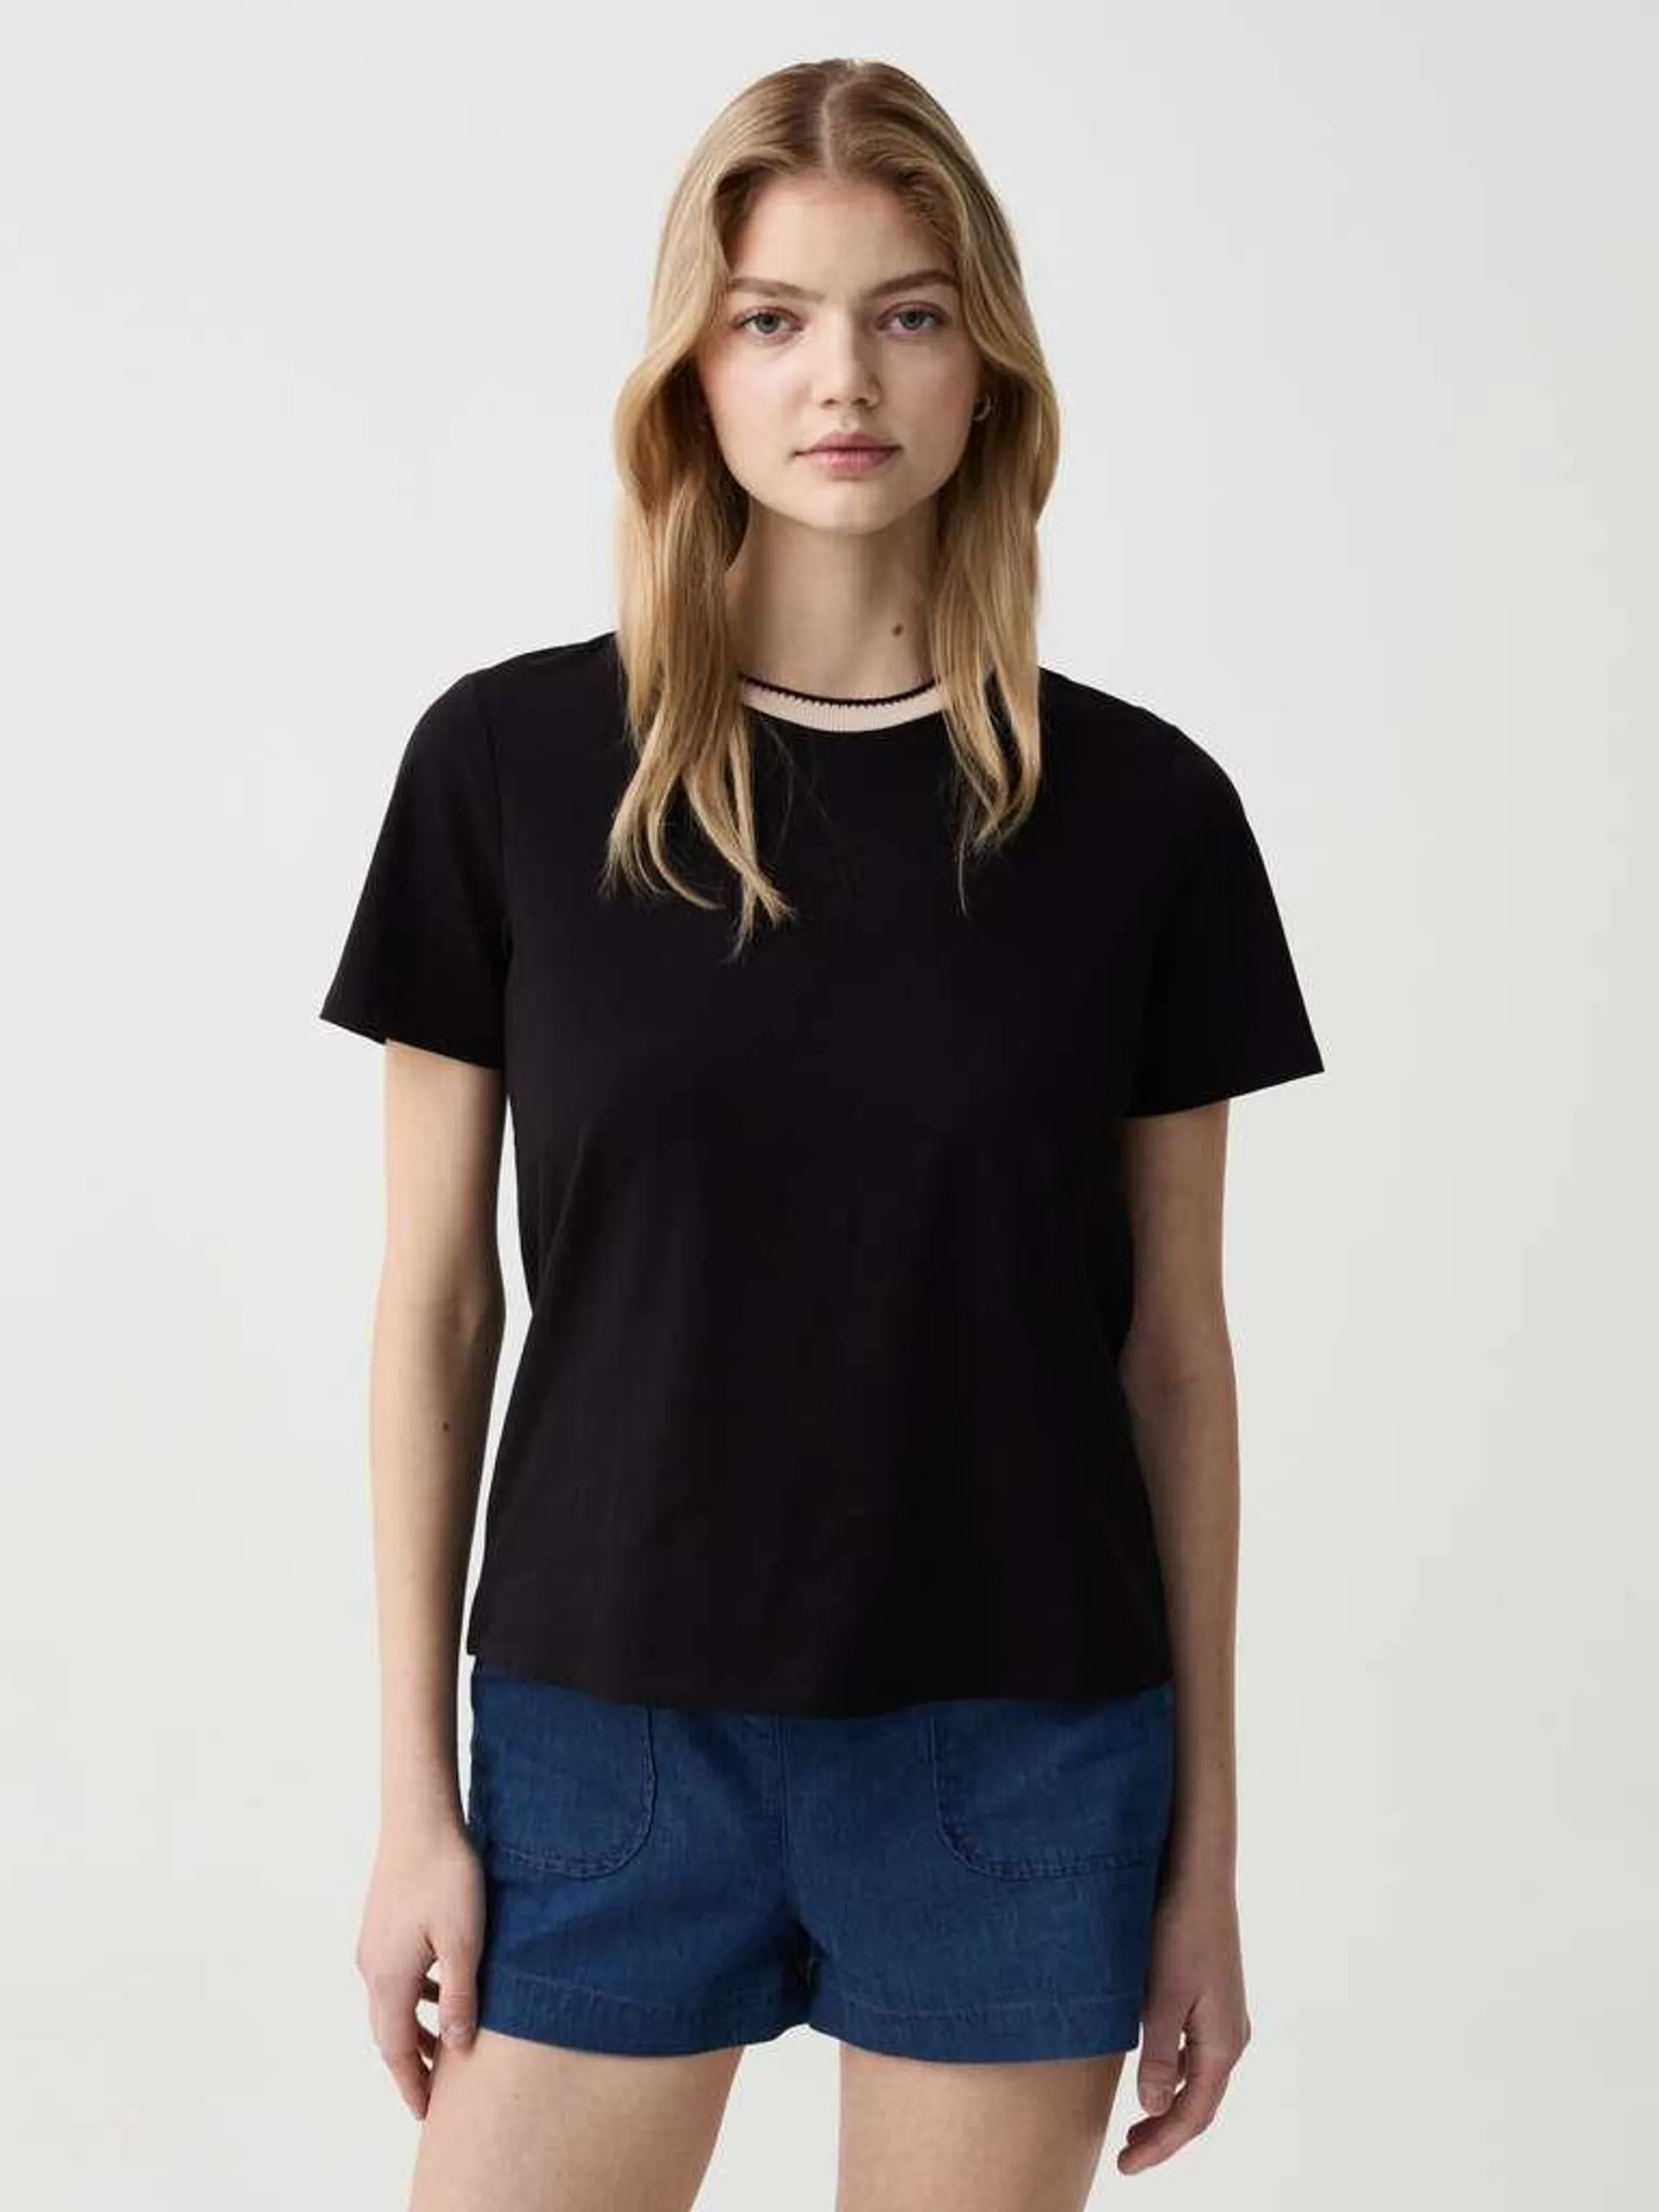 Black T-shirt with round neck with striped edging